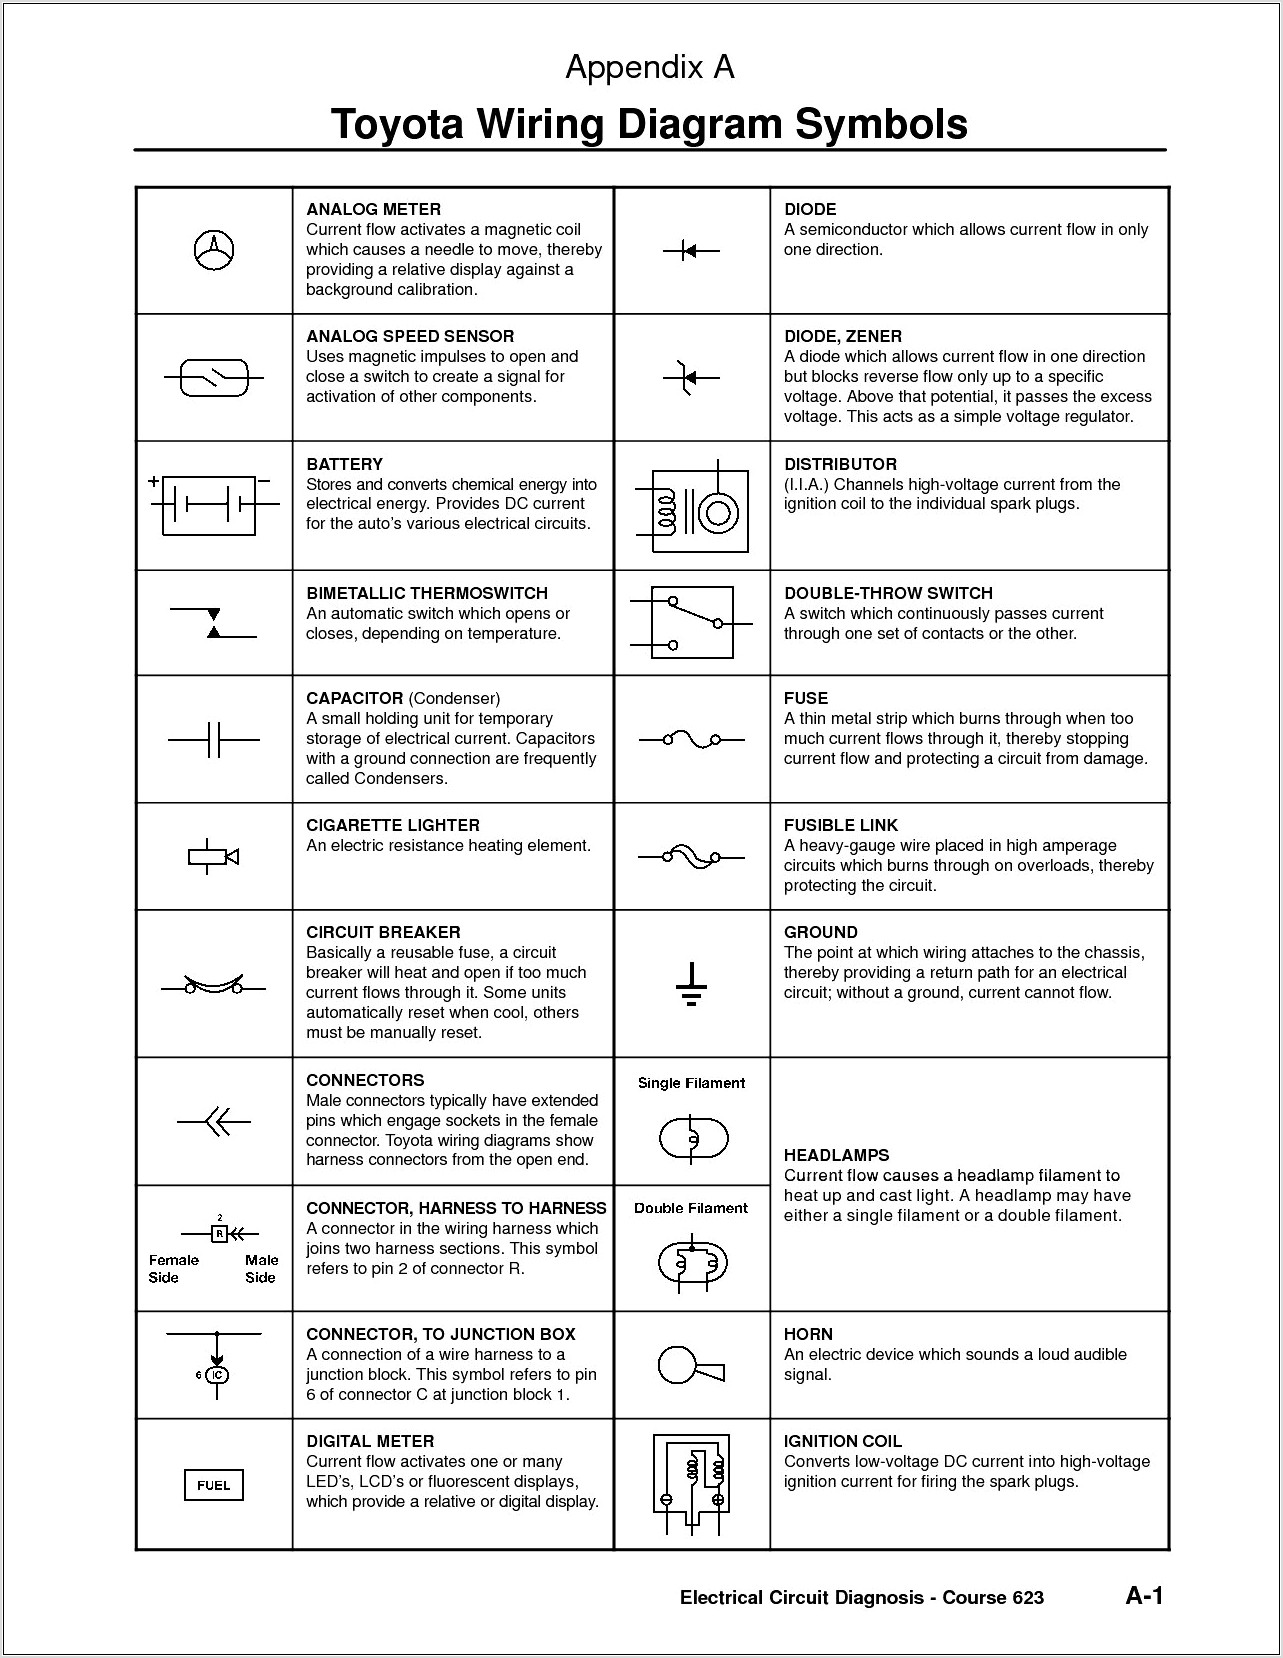 Wiring Diagram Symbols And Meanings